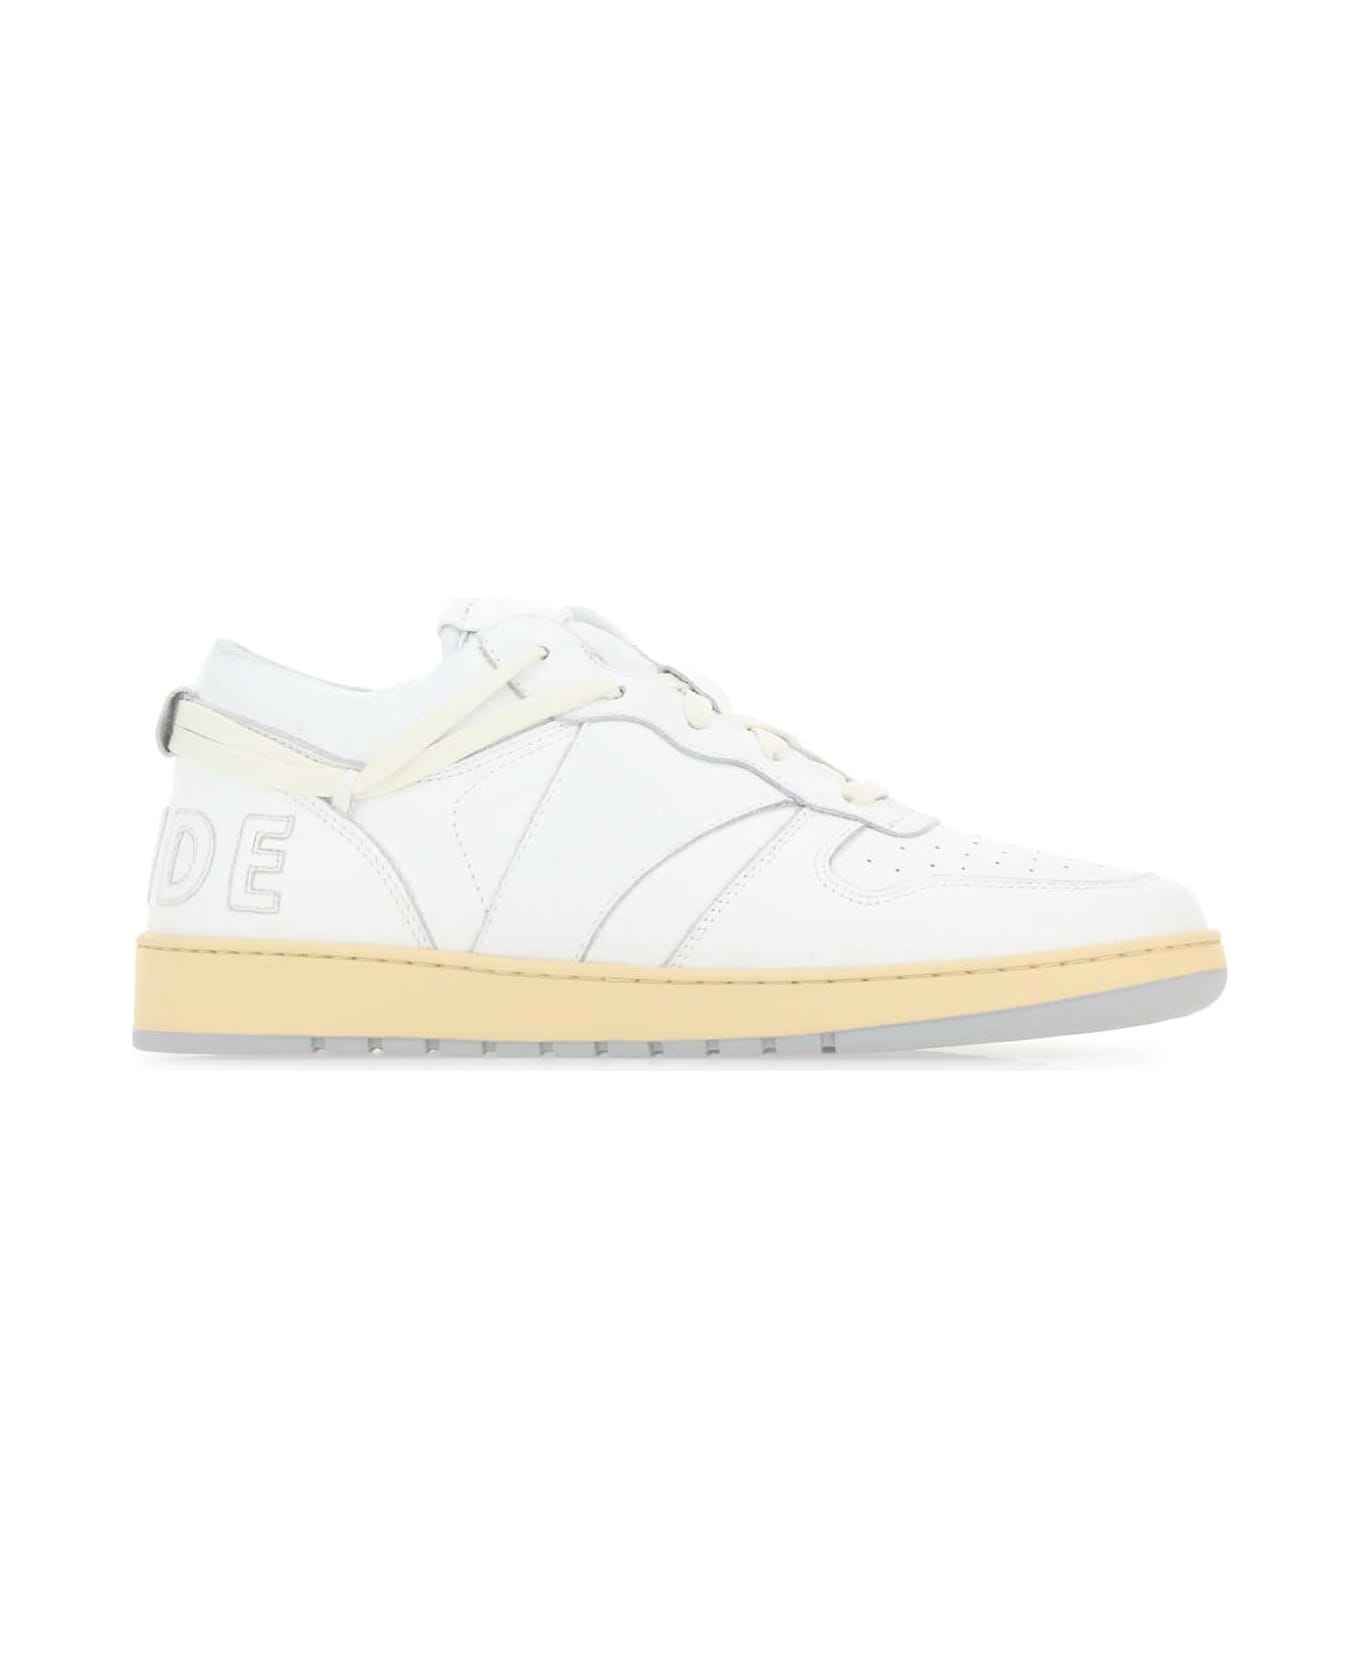 Rhude White Leather Rhecess Sneakers - 0444 スニーカー